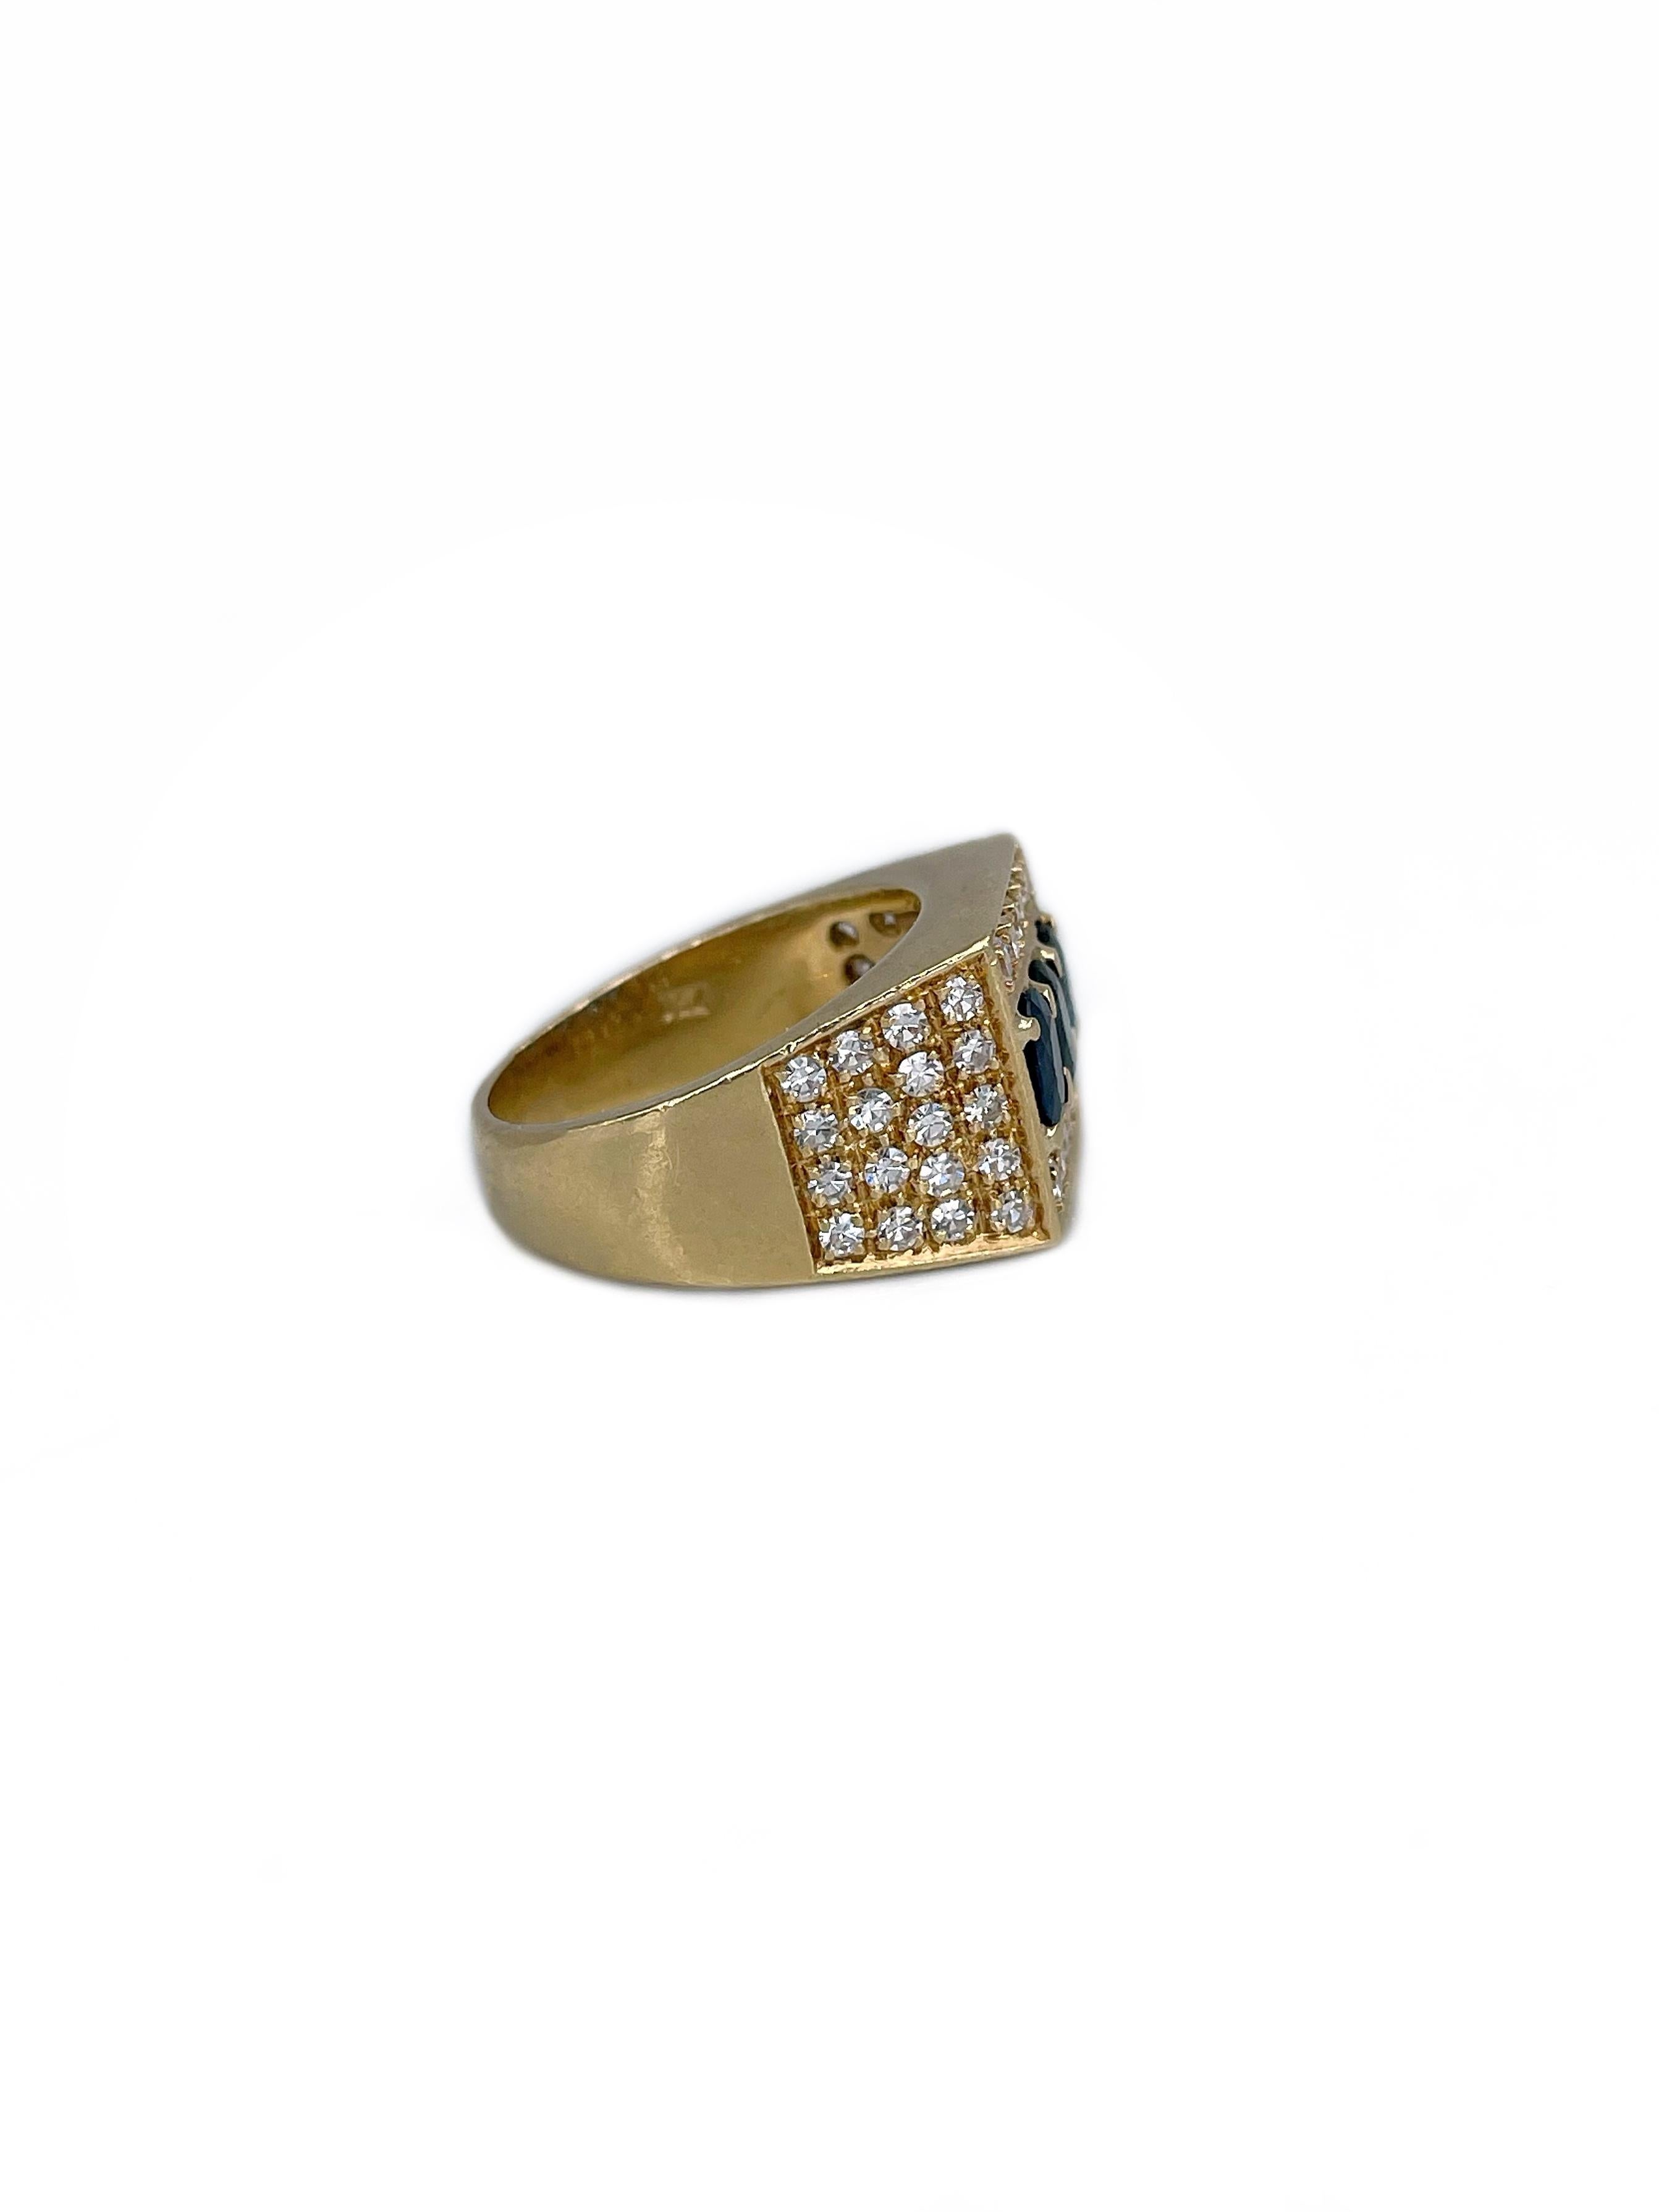 This is a vintage three-stone ring crafted in 18K yellow gold. Circa 1970. 

The piece features:
- 3 sapphires (oval cut, TW 1.00ct, vB 7/5, VS, H)
- 46 diamonds (17 facet, TW 0.73ct, RW, VS)

Weight: 9.86g
Size: 16.75 (US 6.25)

IMPORTANT: please